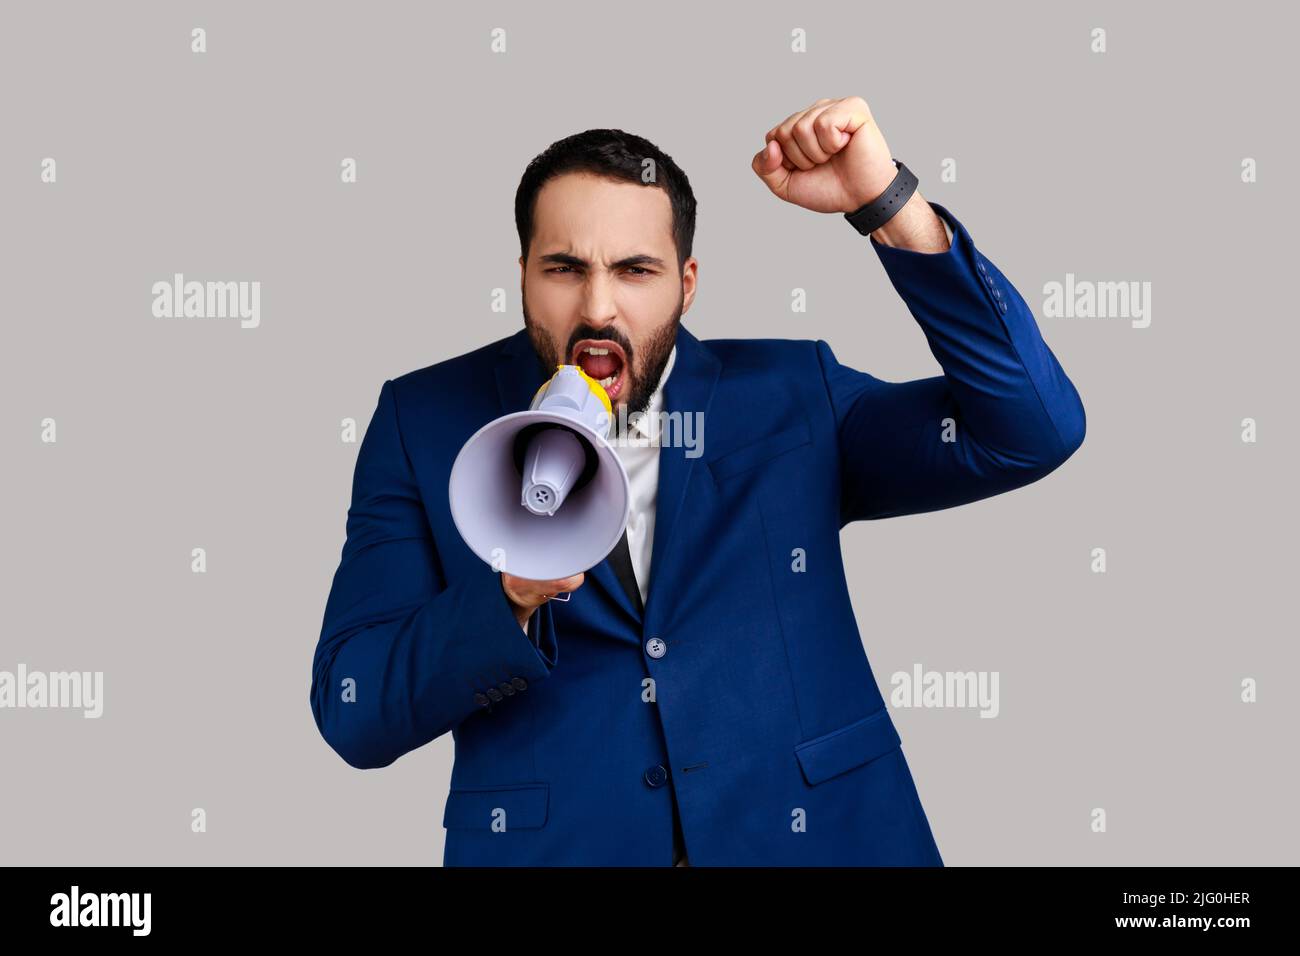 Portrait of bearded businessman standing with raised hands and holding megaphone, screaming in loud speaker, protesting, wearing official style suit. Indoor studio shot isolated on gray background. Stock Photo